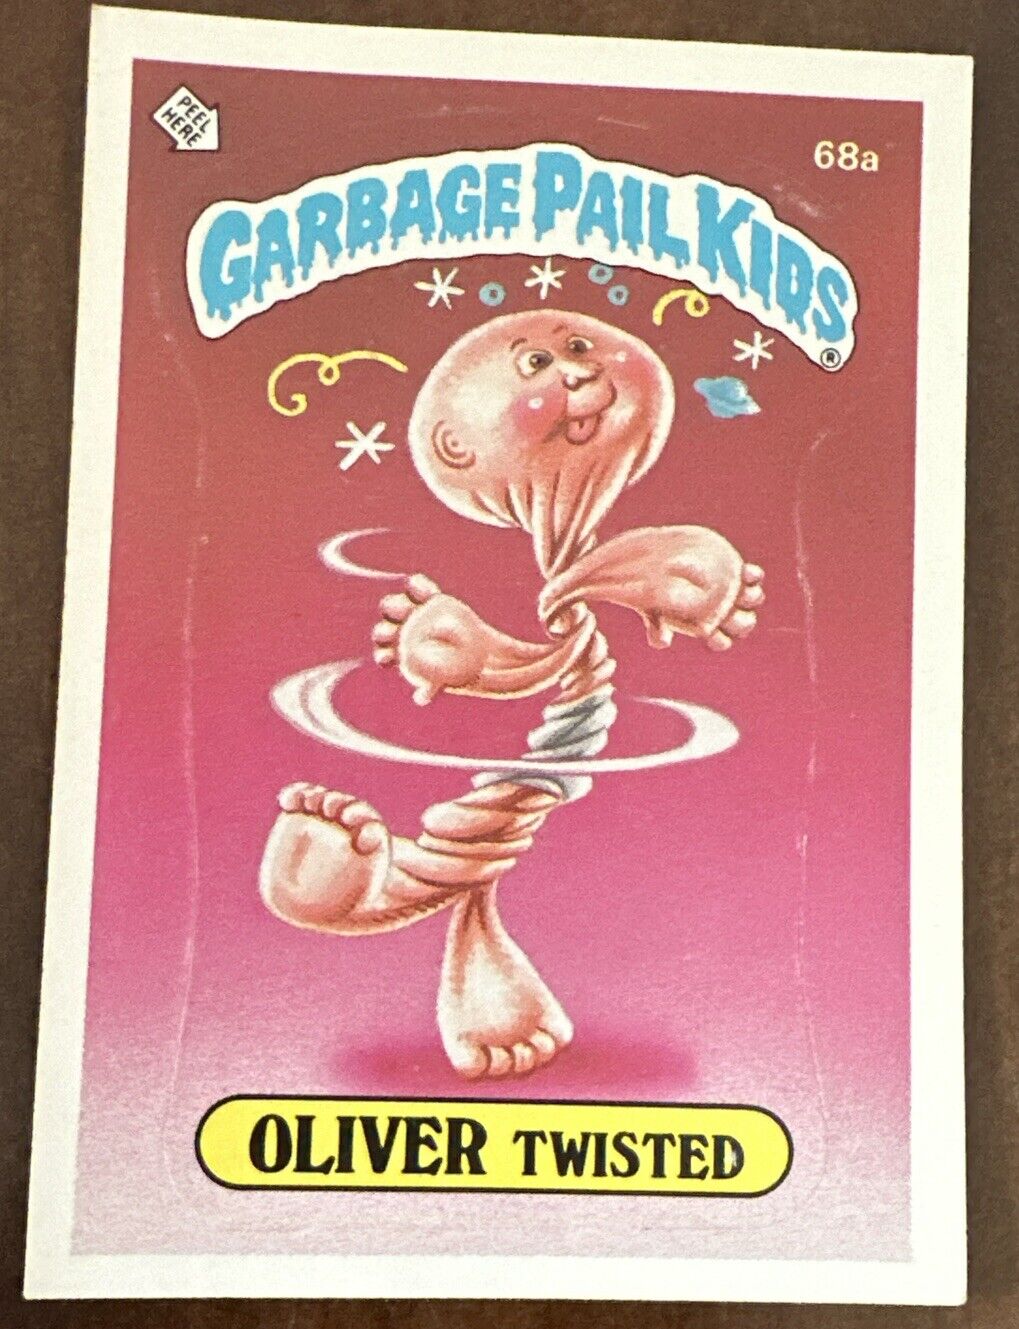 1985 Topps Garbage Pail Kids Original 2nd Series Card #68a OLIVER TWISTED